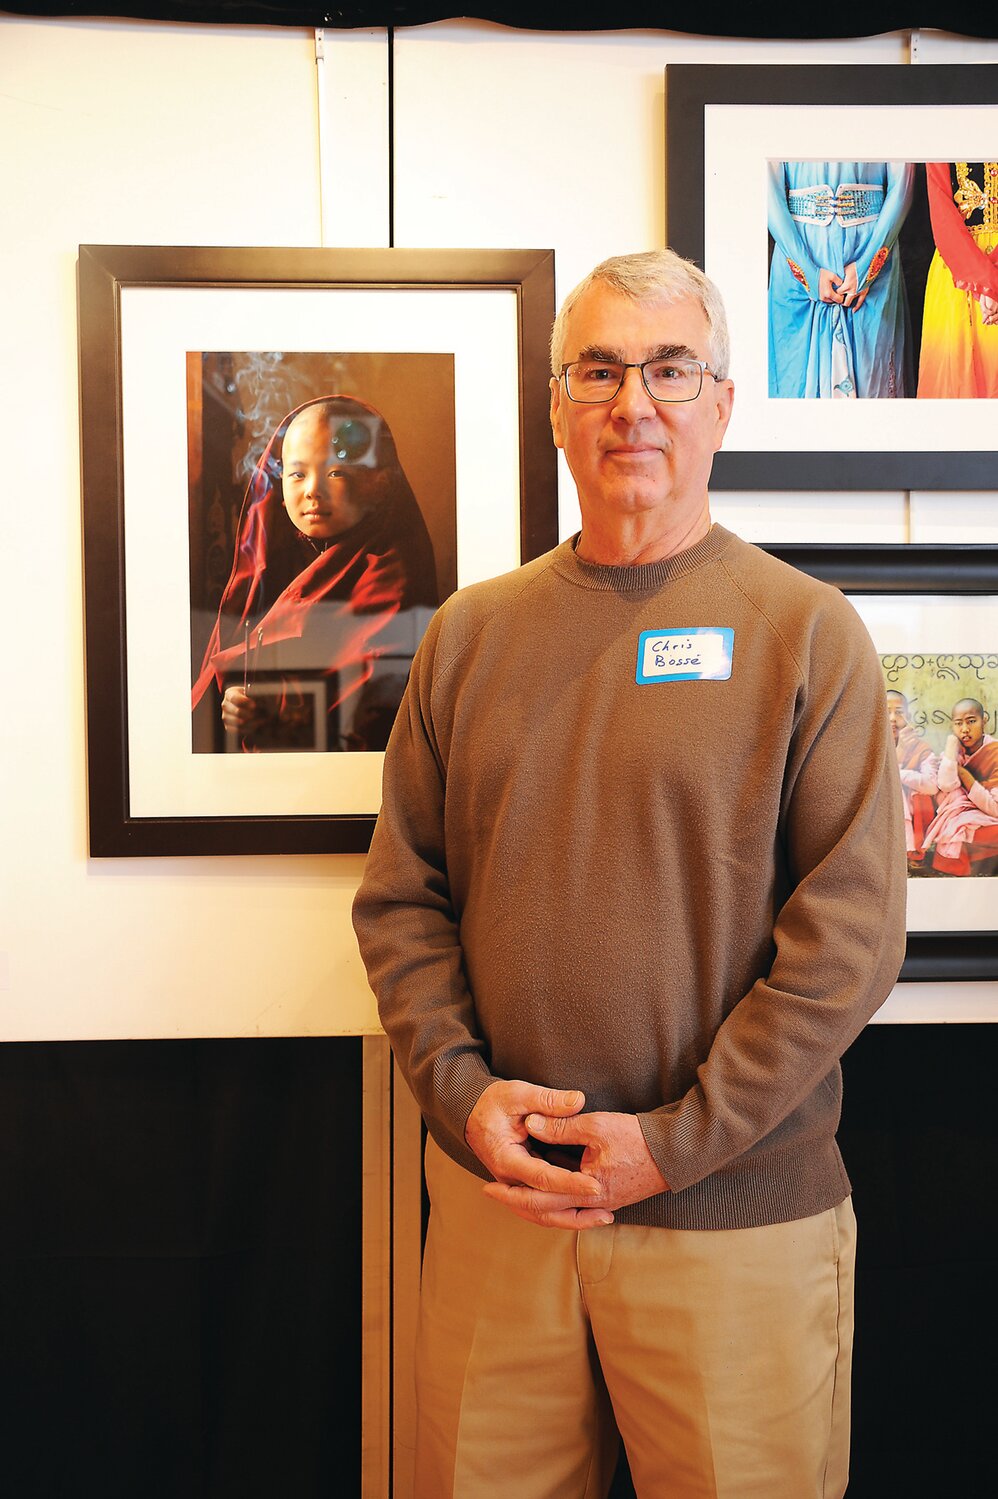 Christopher Bosse standing next to his work “Contemplation,” which won the prize for Portraiture.